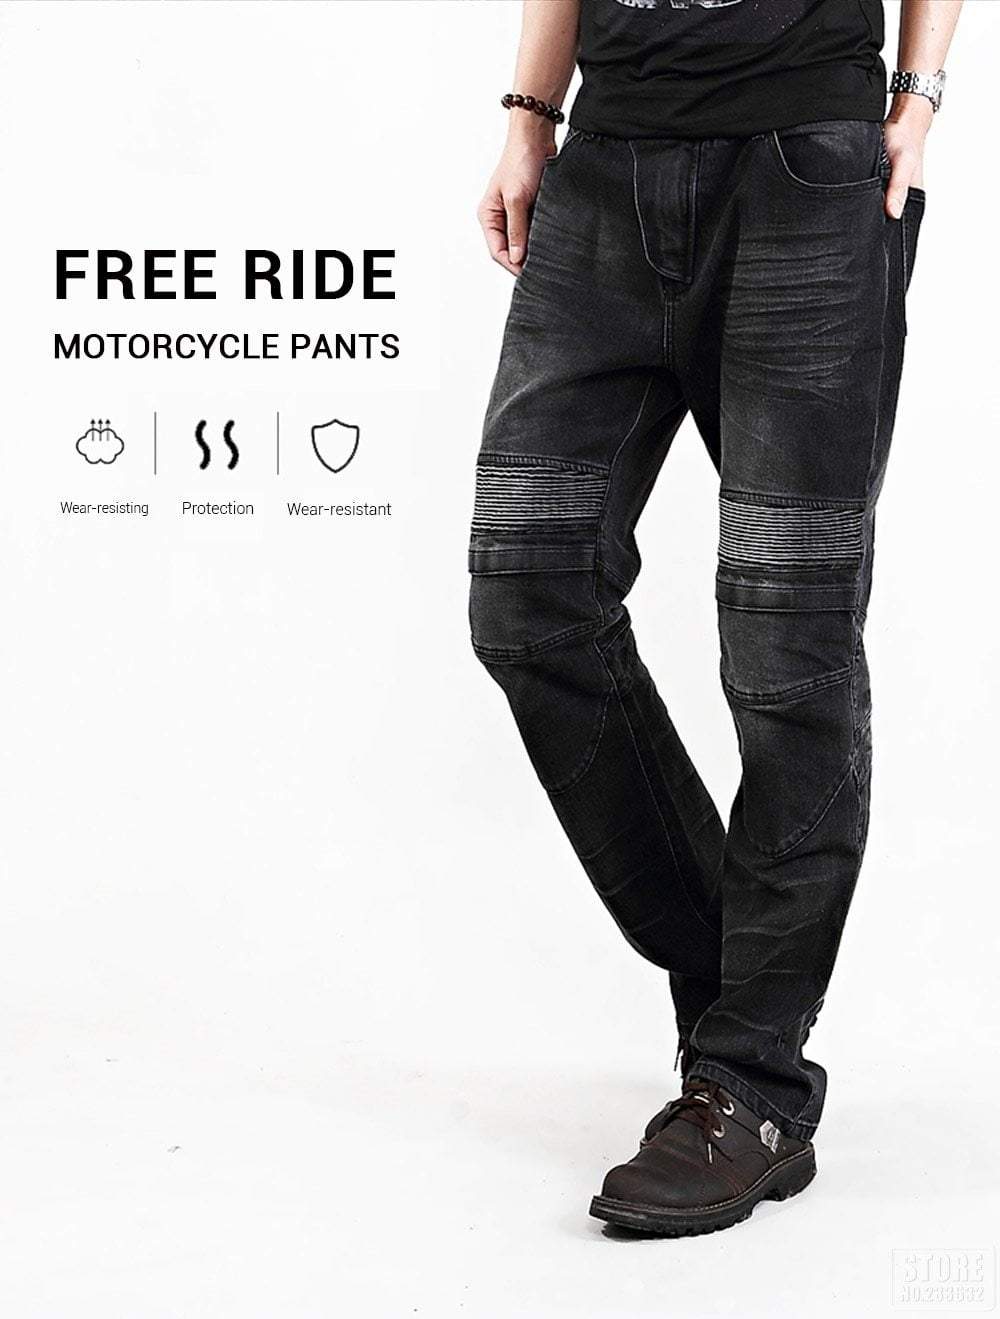 BUY MOTO CENTRIC Motorcycle Riding Jeans With Armor ON SALE NOW! - Rugged Motorbike  Jeans